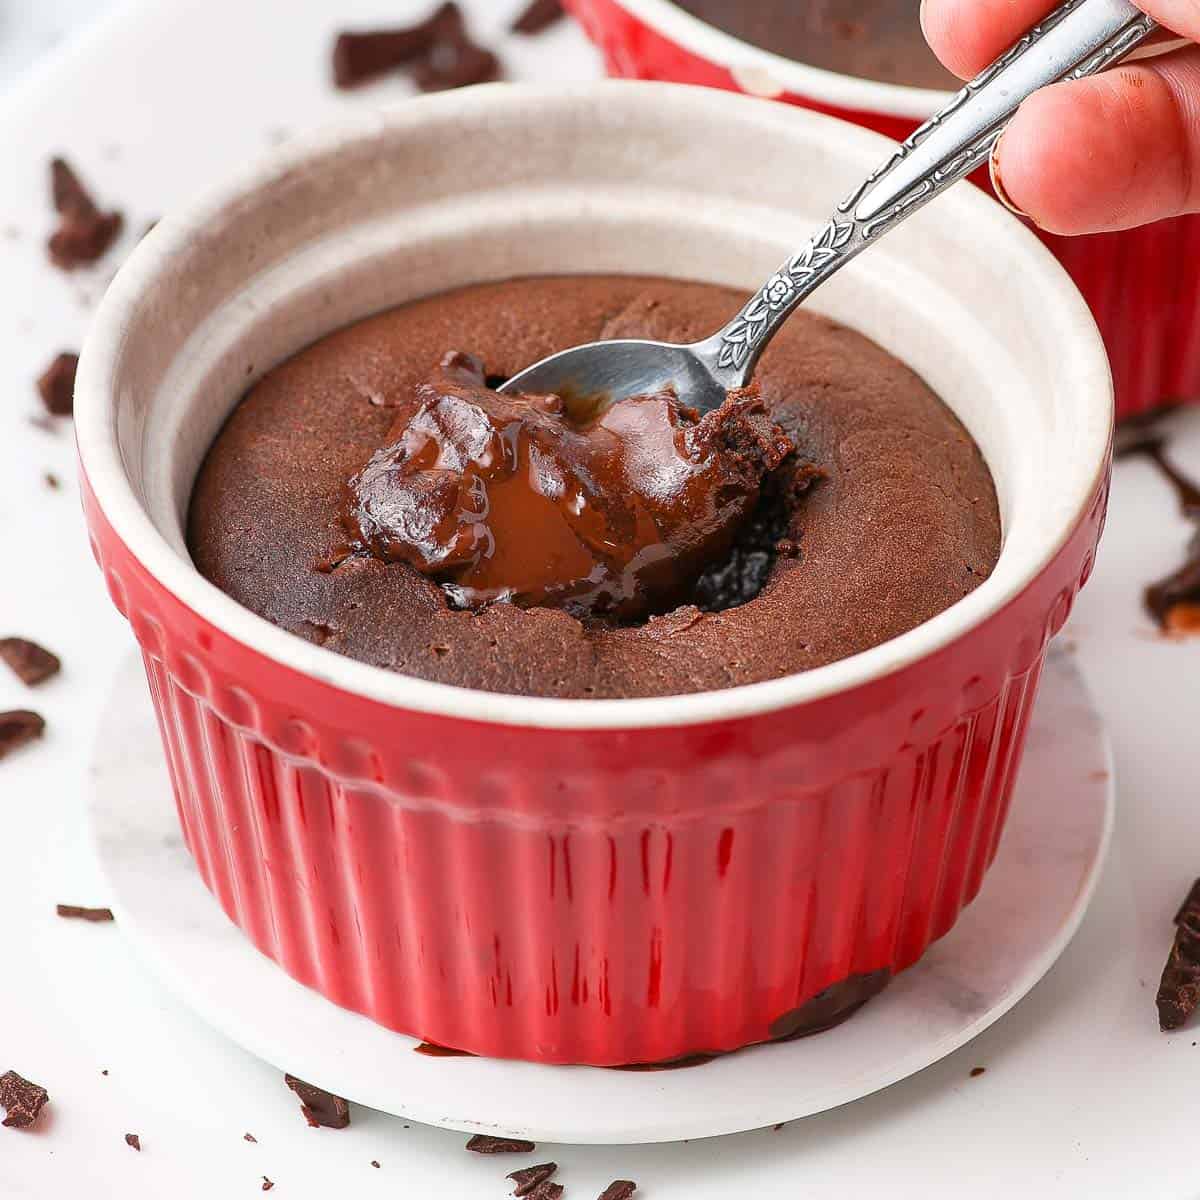 Dipping a spoon in a warm chocolate fondant cake.